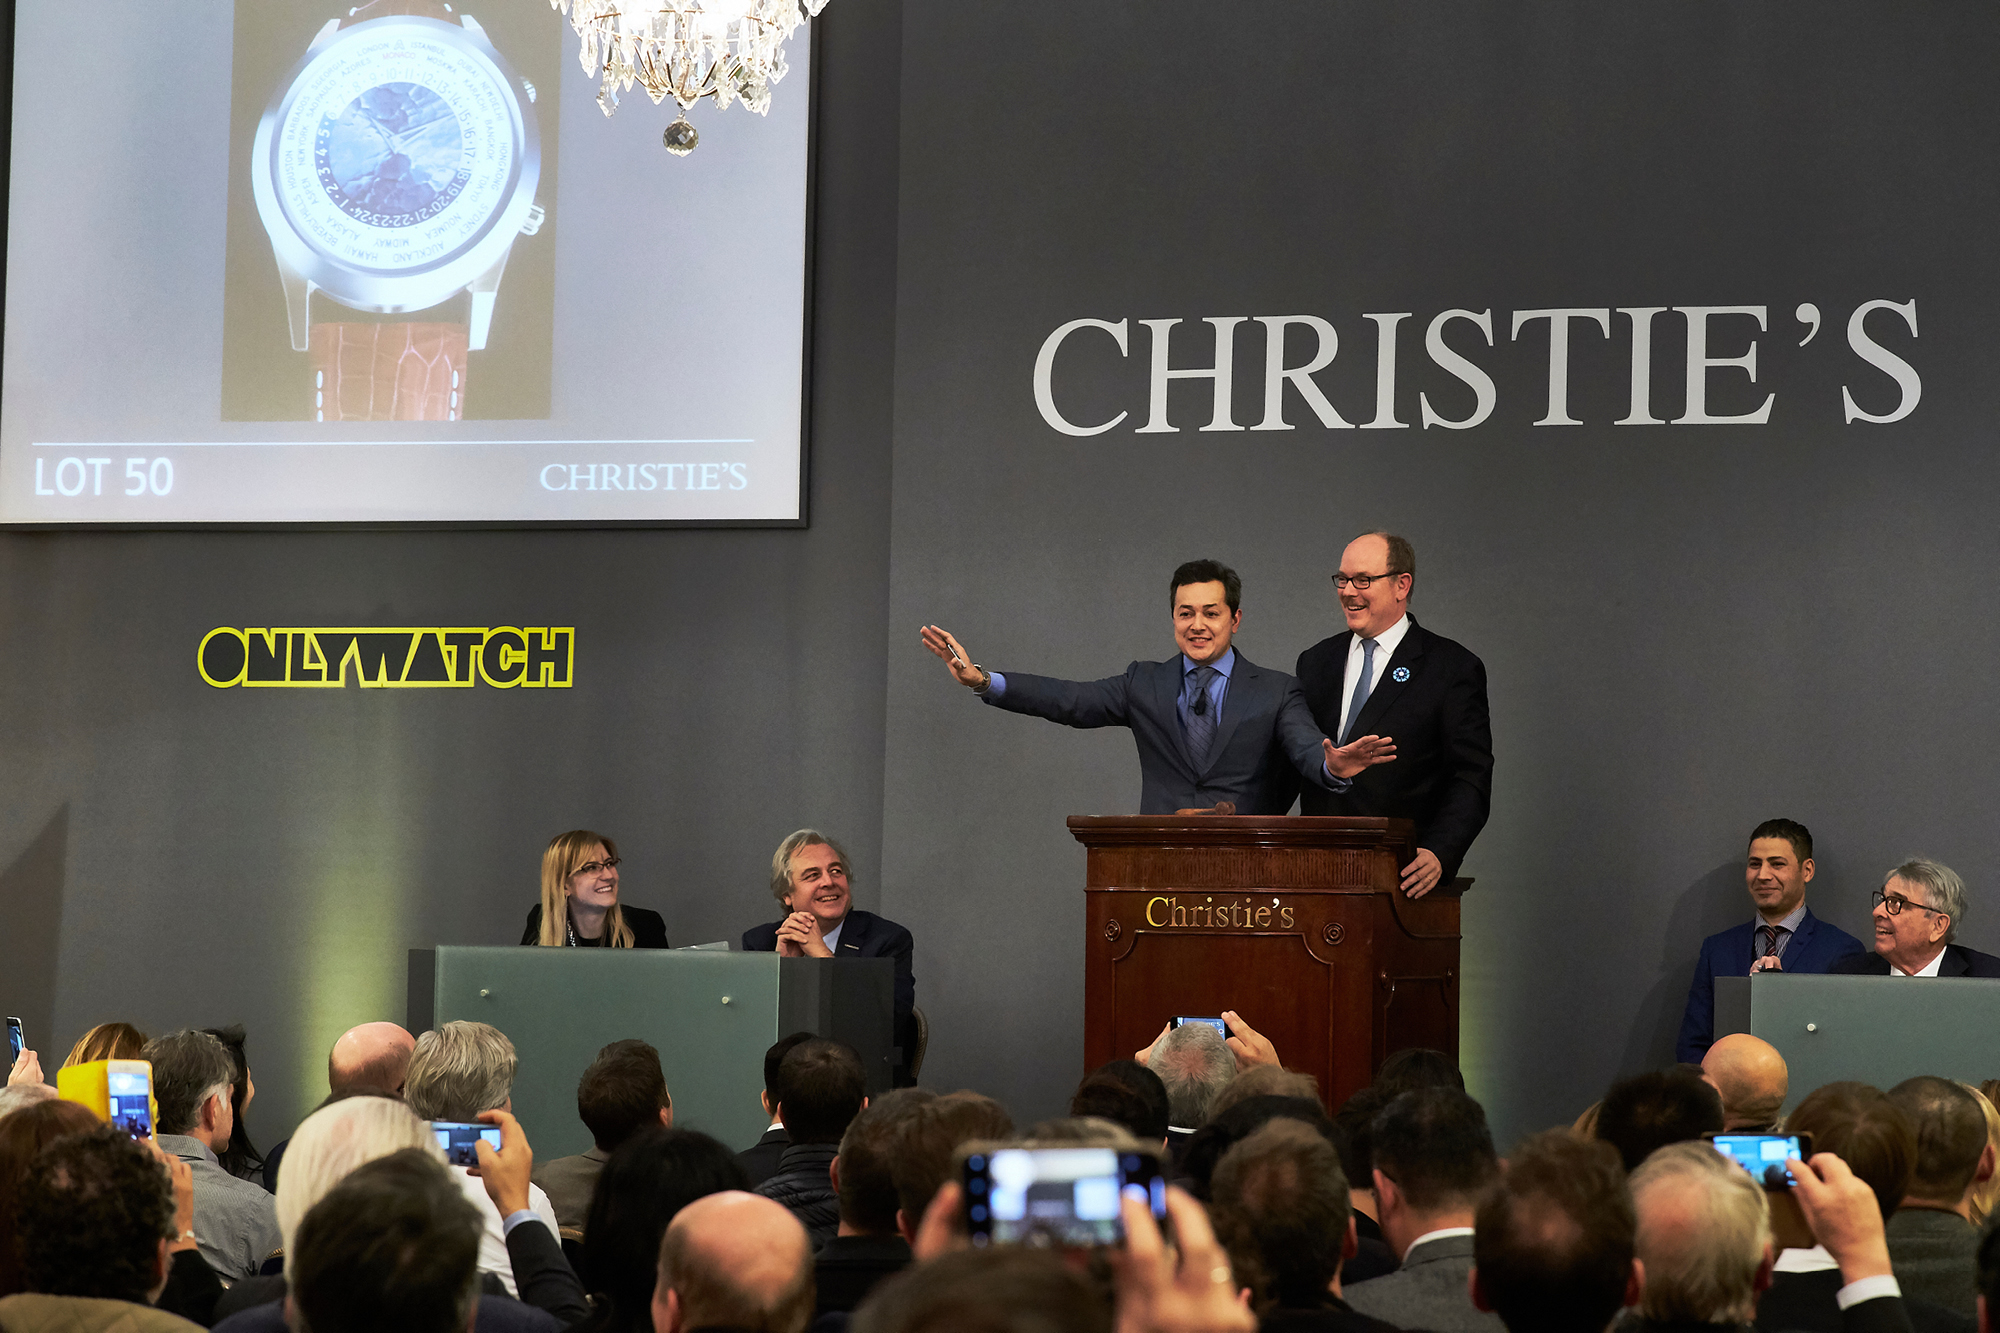 Only Watch auction at Christie's, Geneva in 2017